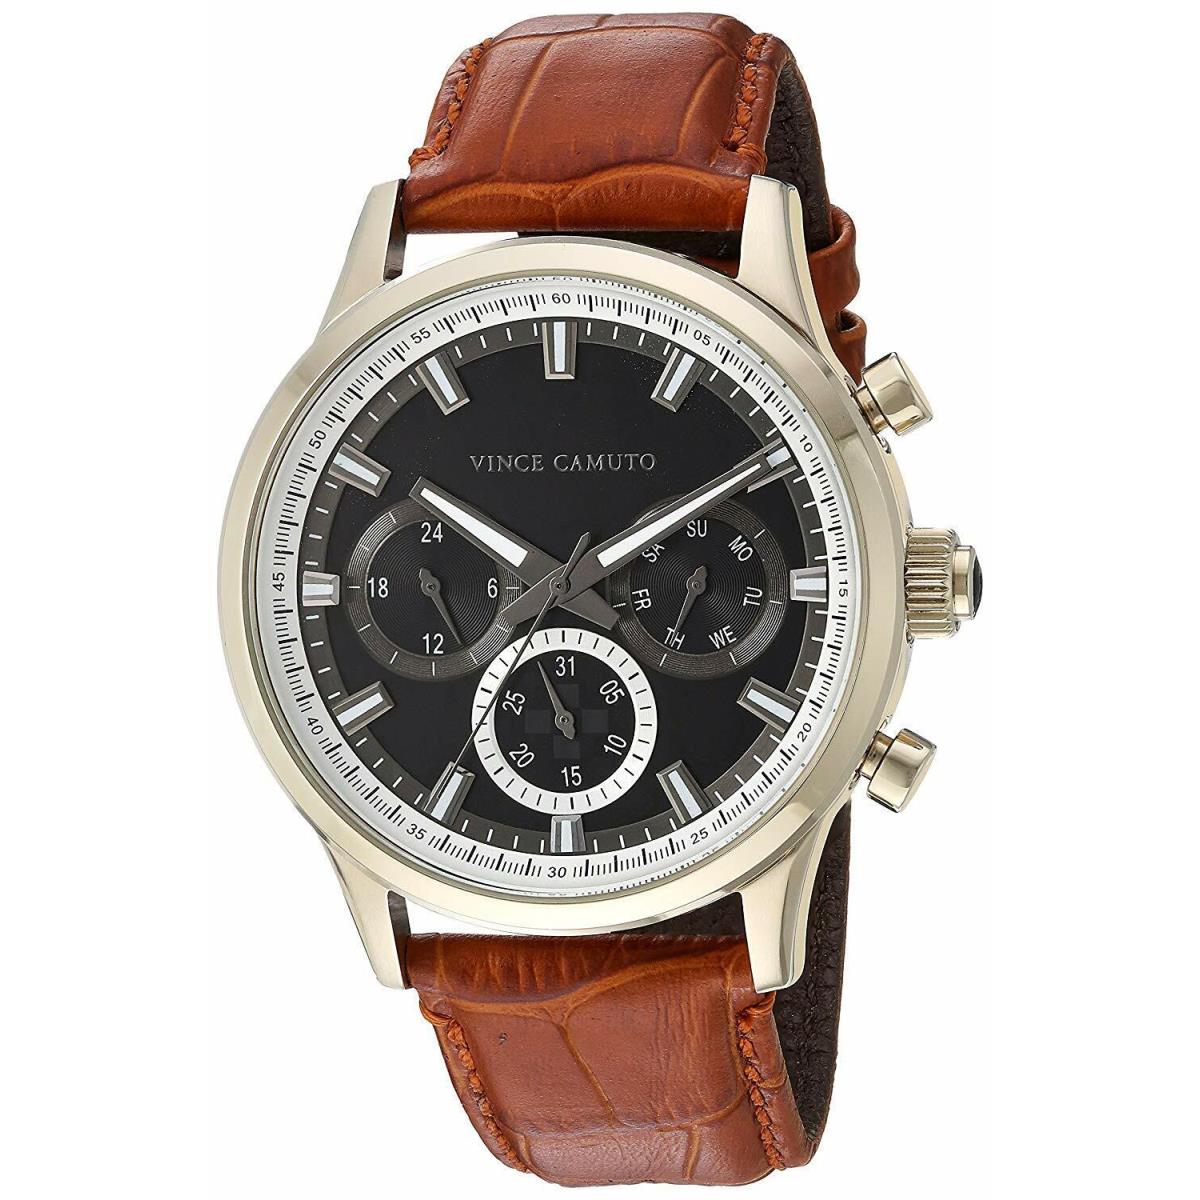 Vince Camuto VC/1089BKGP Silver Tone Brown Leather Mens Chronograph Watch